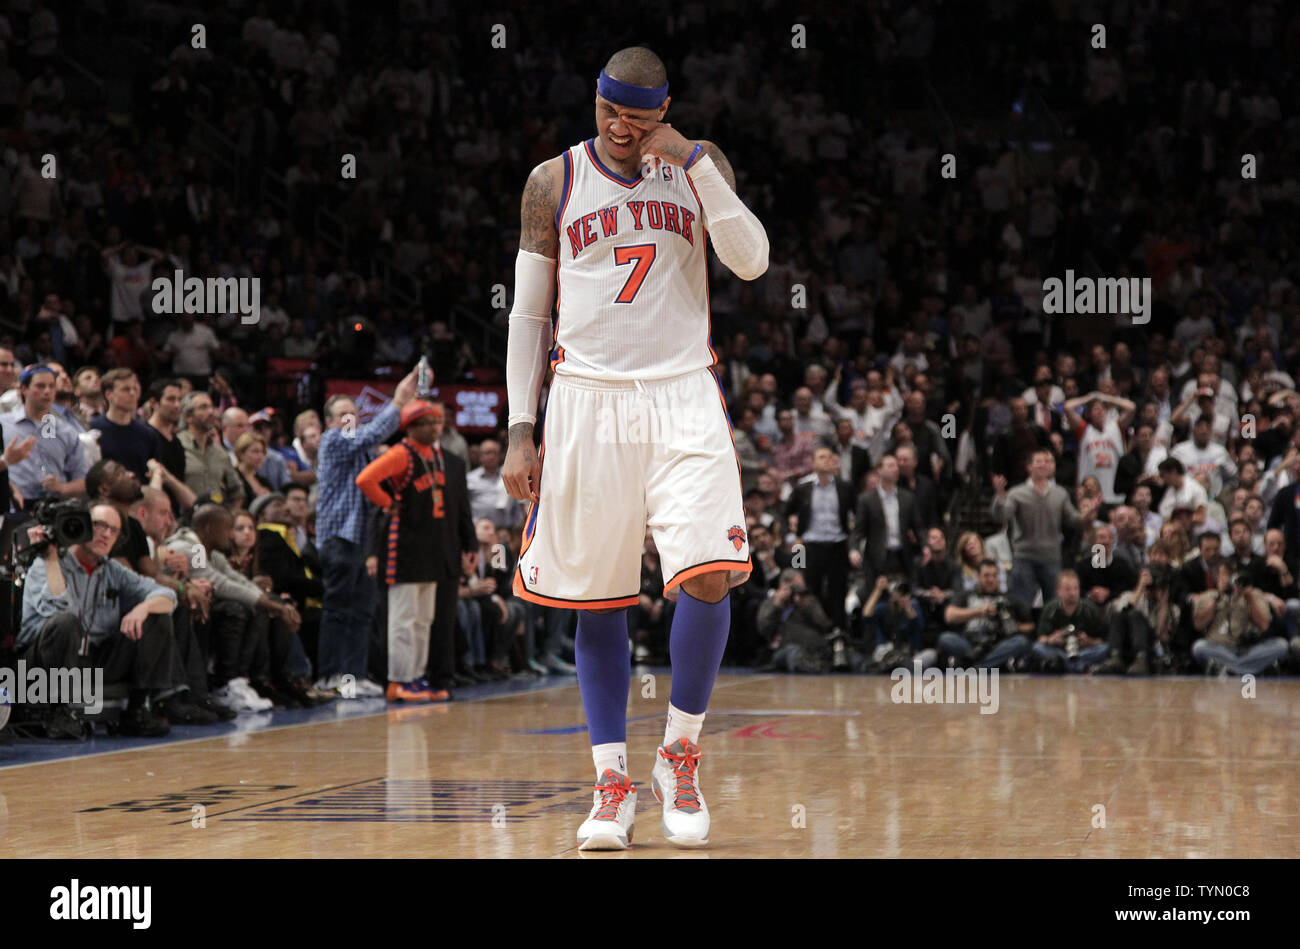 https://c8.alamy.com/comp/TYN0C8/new-york-knicks-carmelo-anthony-rubs-his-eye-in-the-fourth-quarter-against-the-miami-heat-in-the-second-quarter-of-game-3-of-the-eastern-conference-first-round-of-the-2012-nba-playoffs-at-madison-square-garden-in-new-york-city-on-may-3-2012-the-heat-defeated-the-knicks-87-70-and-lead-the-series-3-0-upijohn-angelillo-TYN0C8.jpg